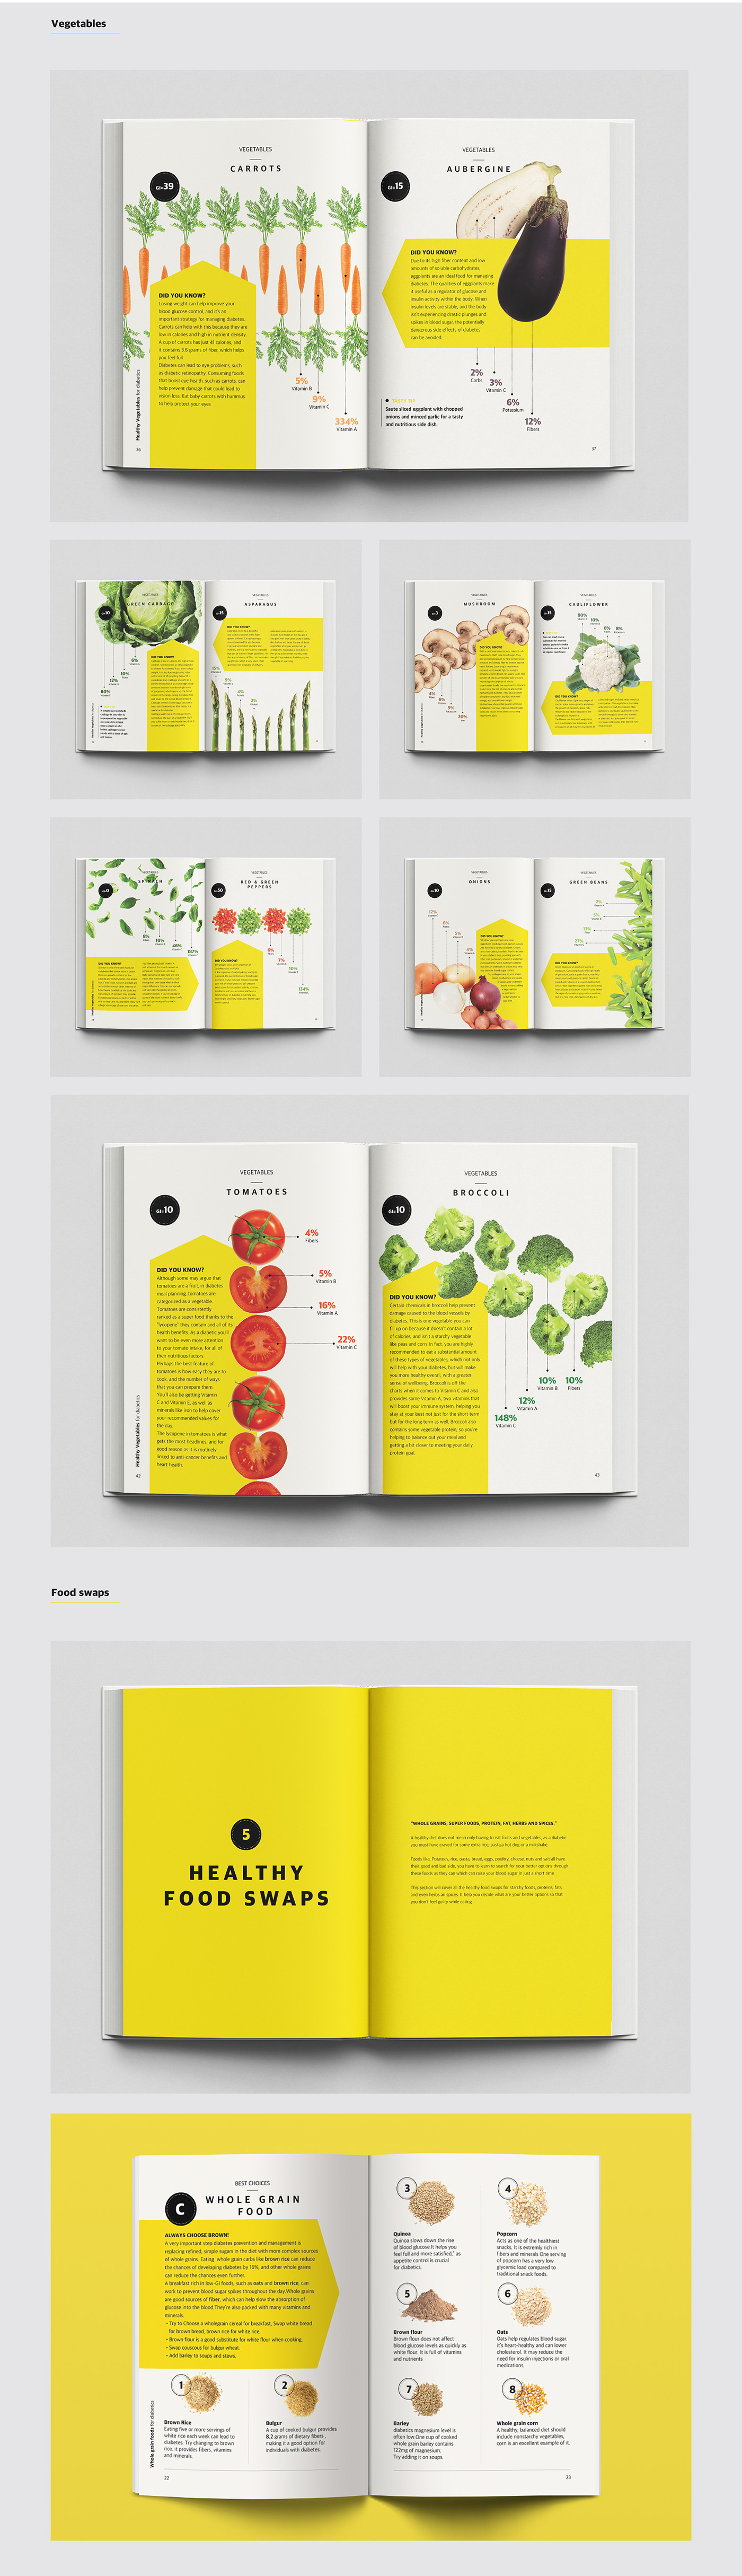 editorial design  book design healthy life style diabetes graphic design  Cook Book Visual Information recipes awaness Education